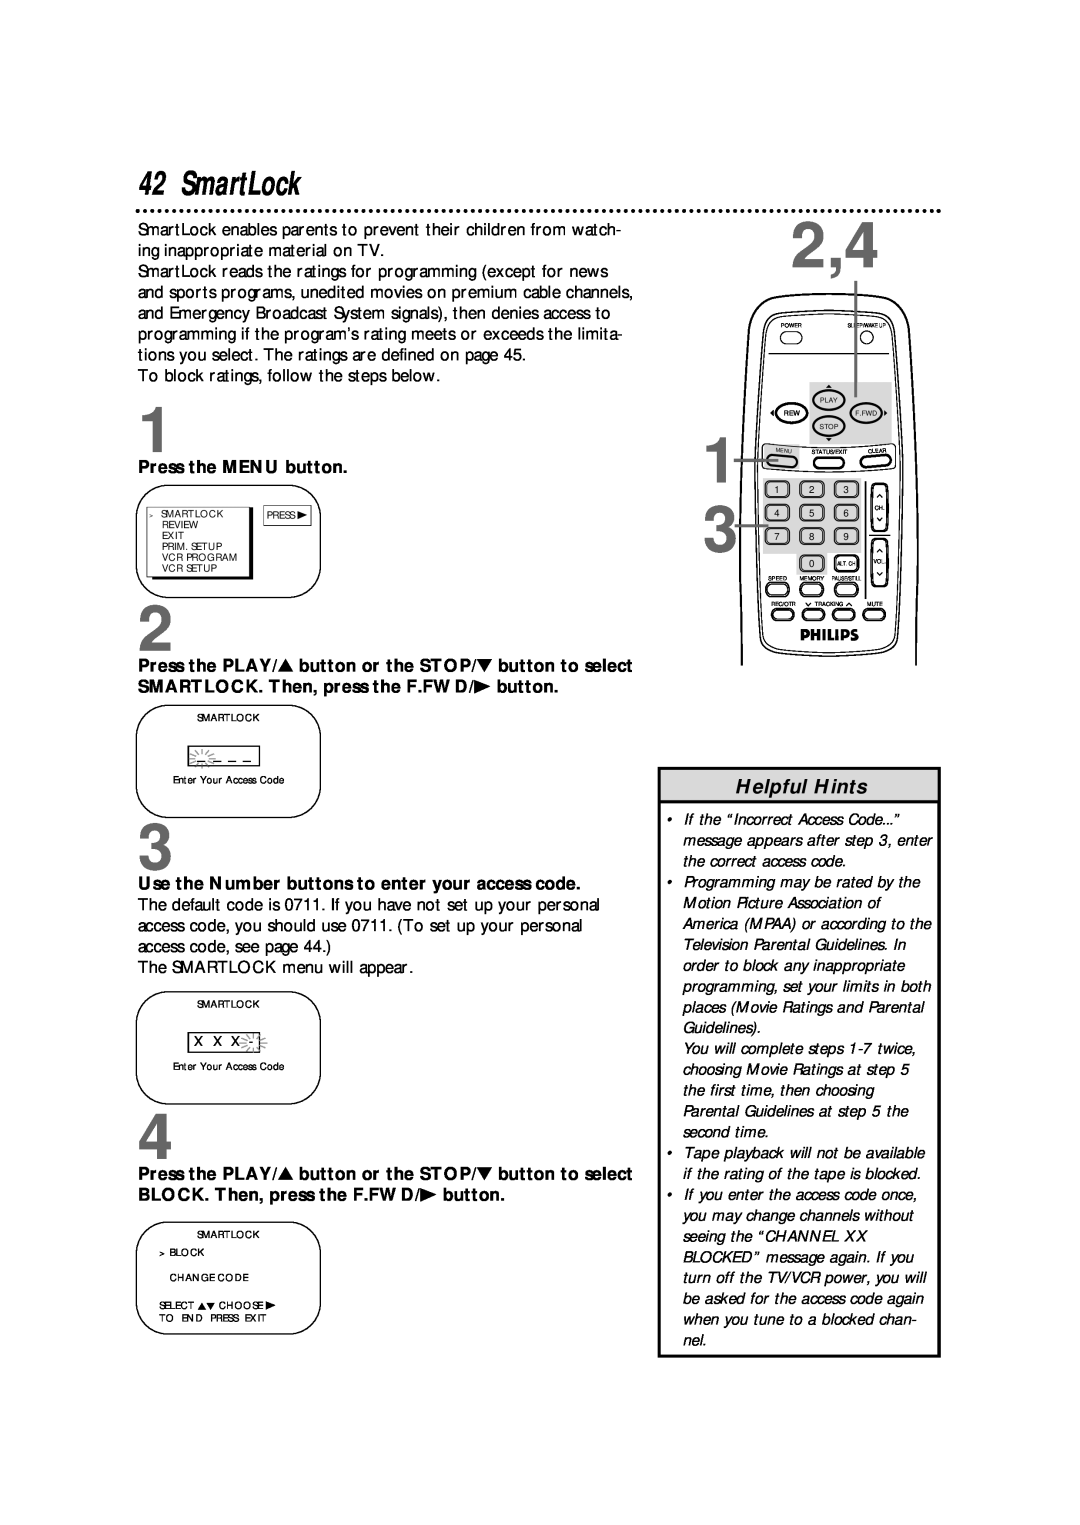 Philips CCB 132AT SmartLock, Helpful Hints, To block ratings, follow the steps below, The SMARTLOCK menu will appear 